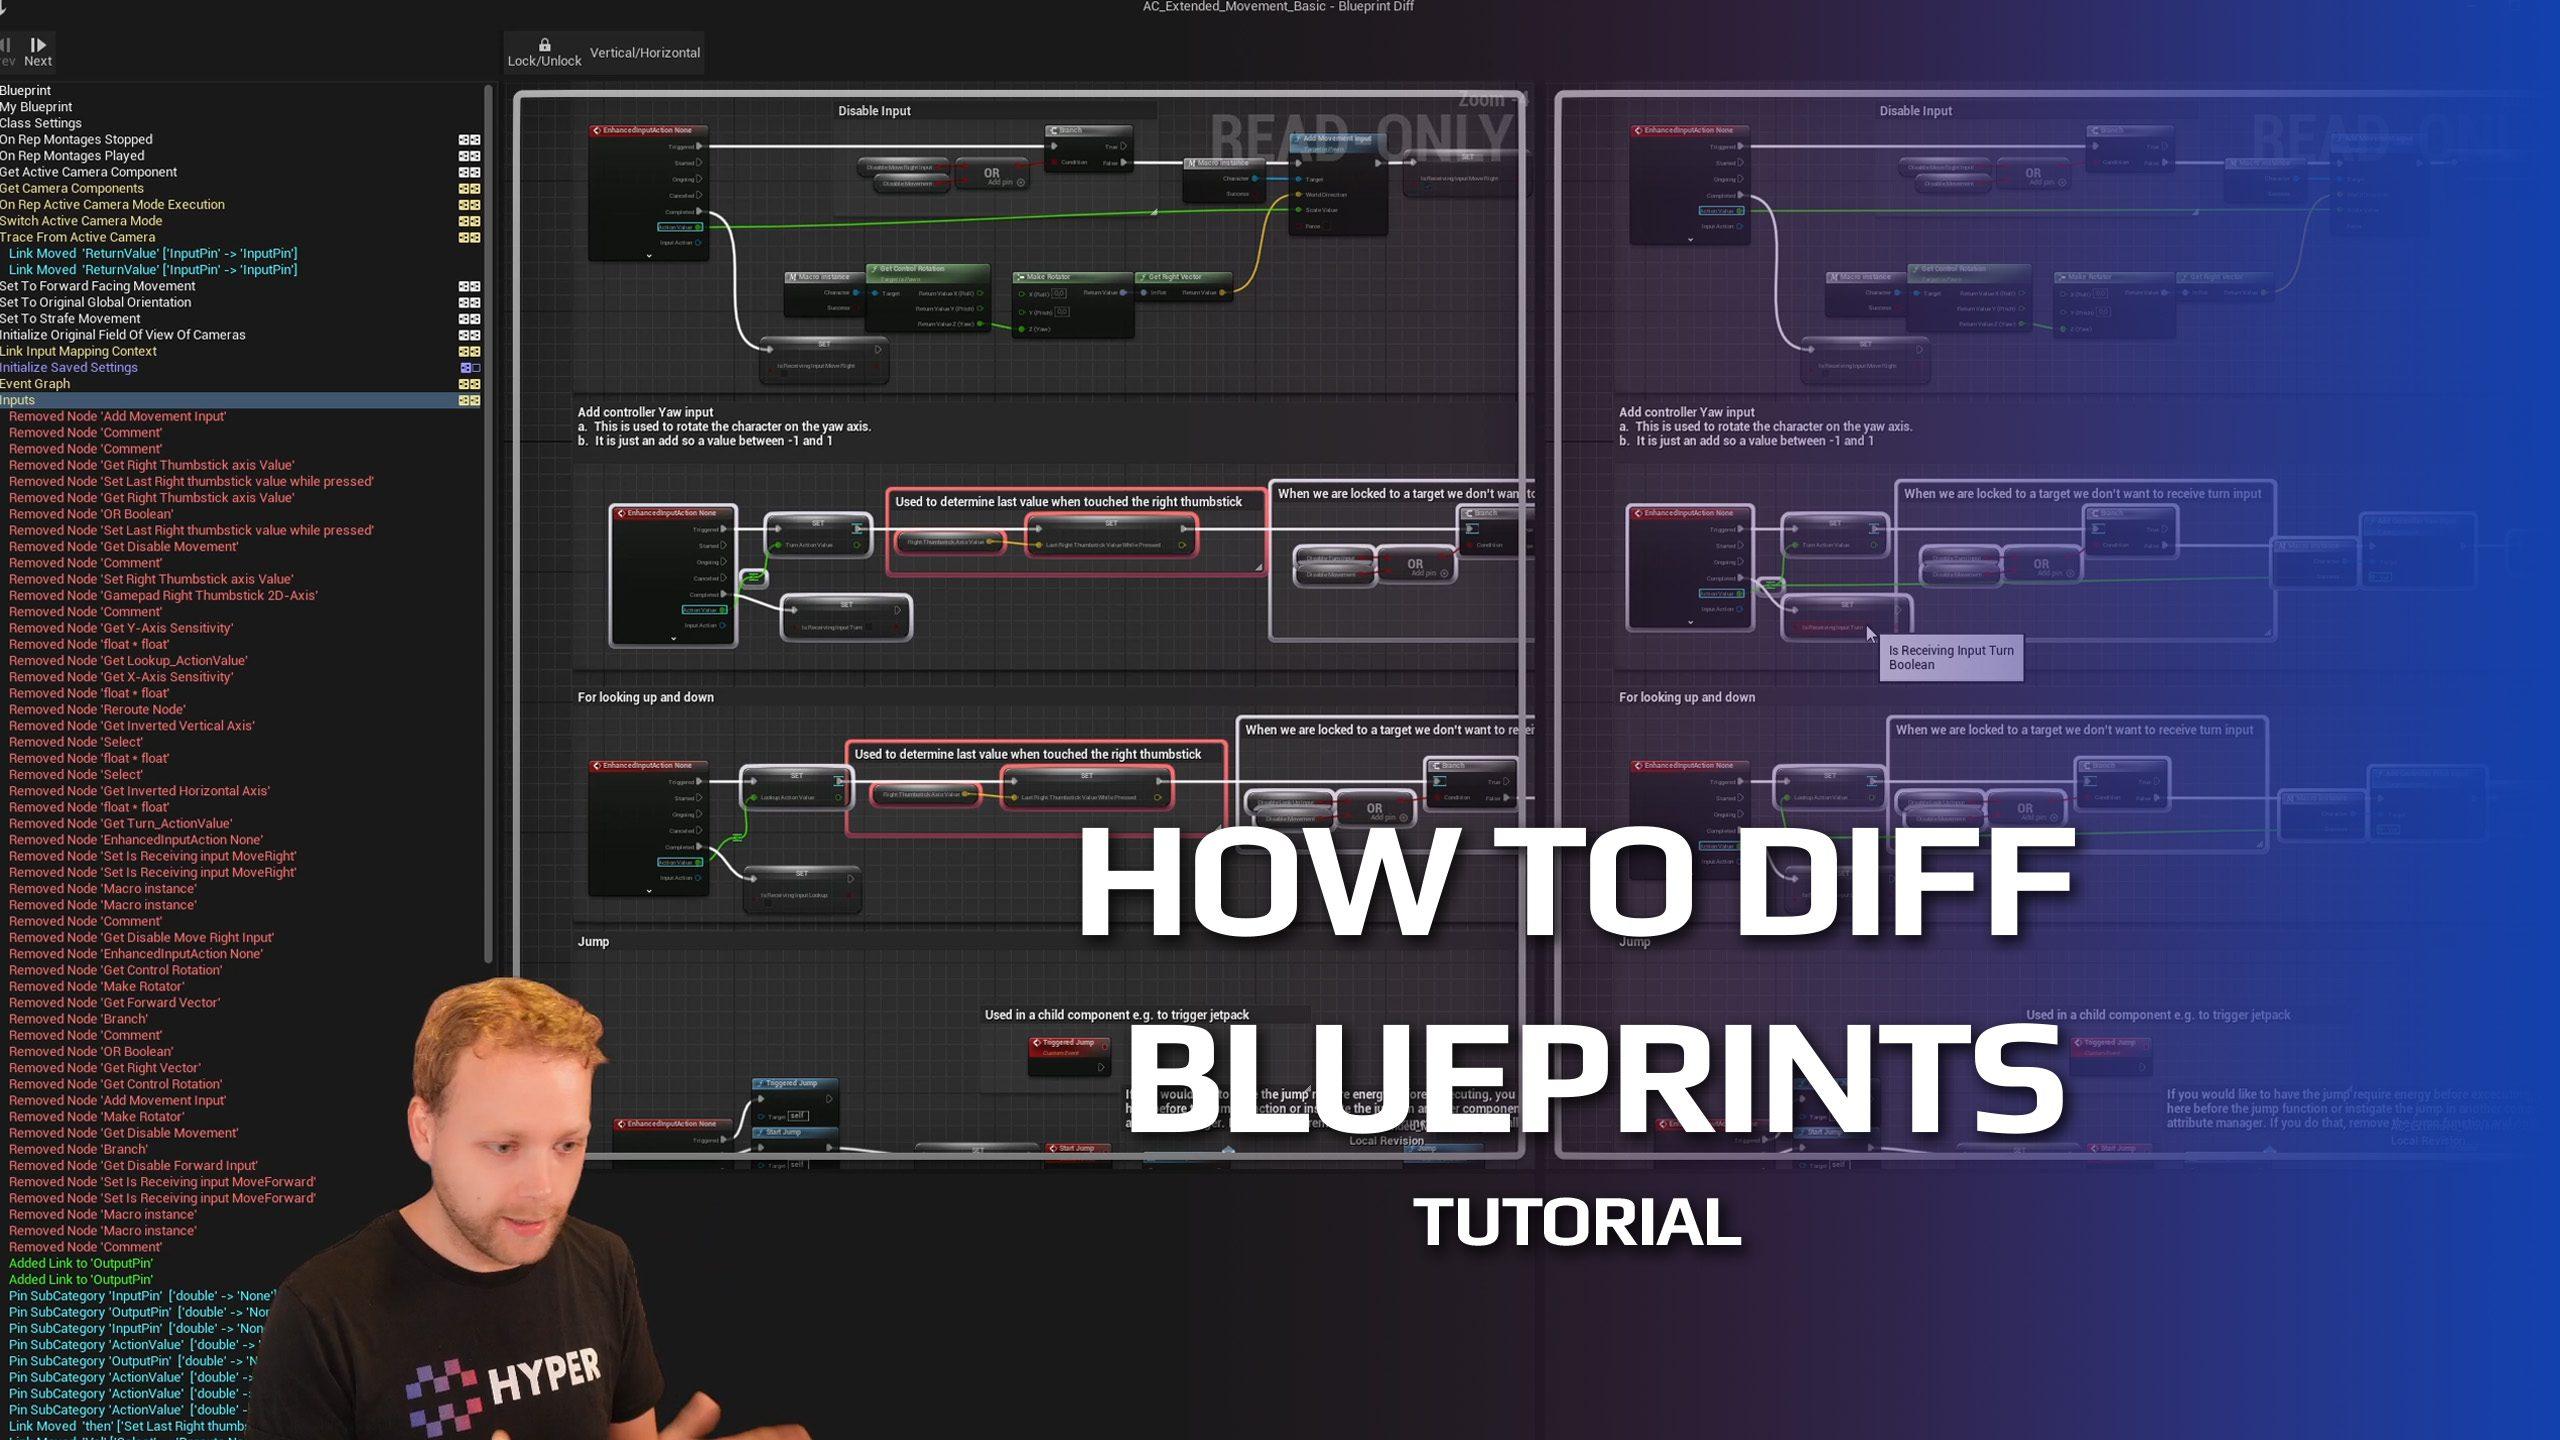 How to diff blueprints